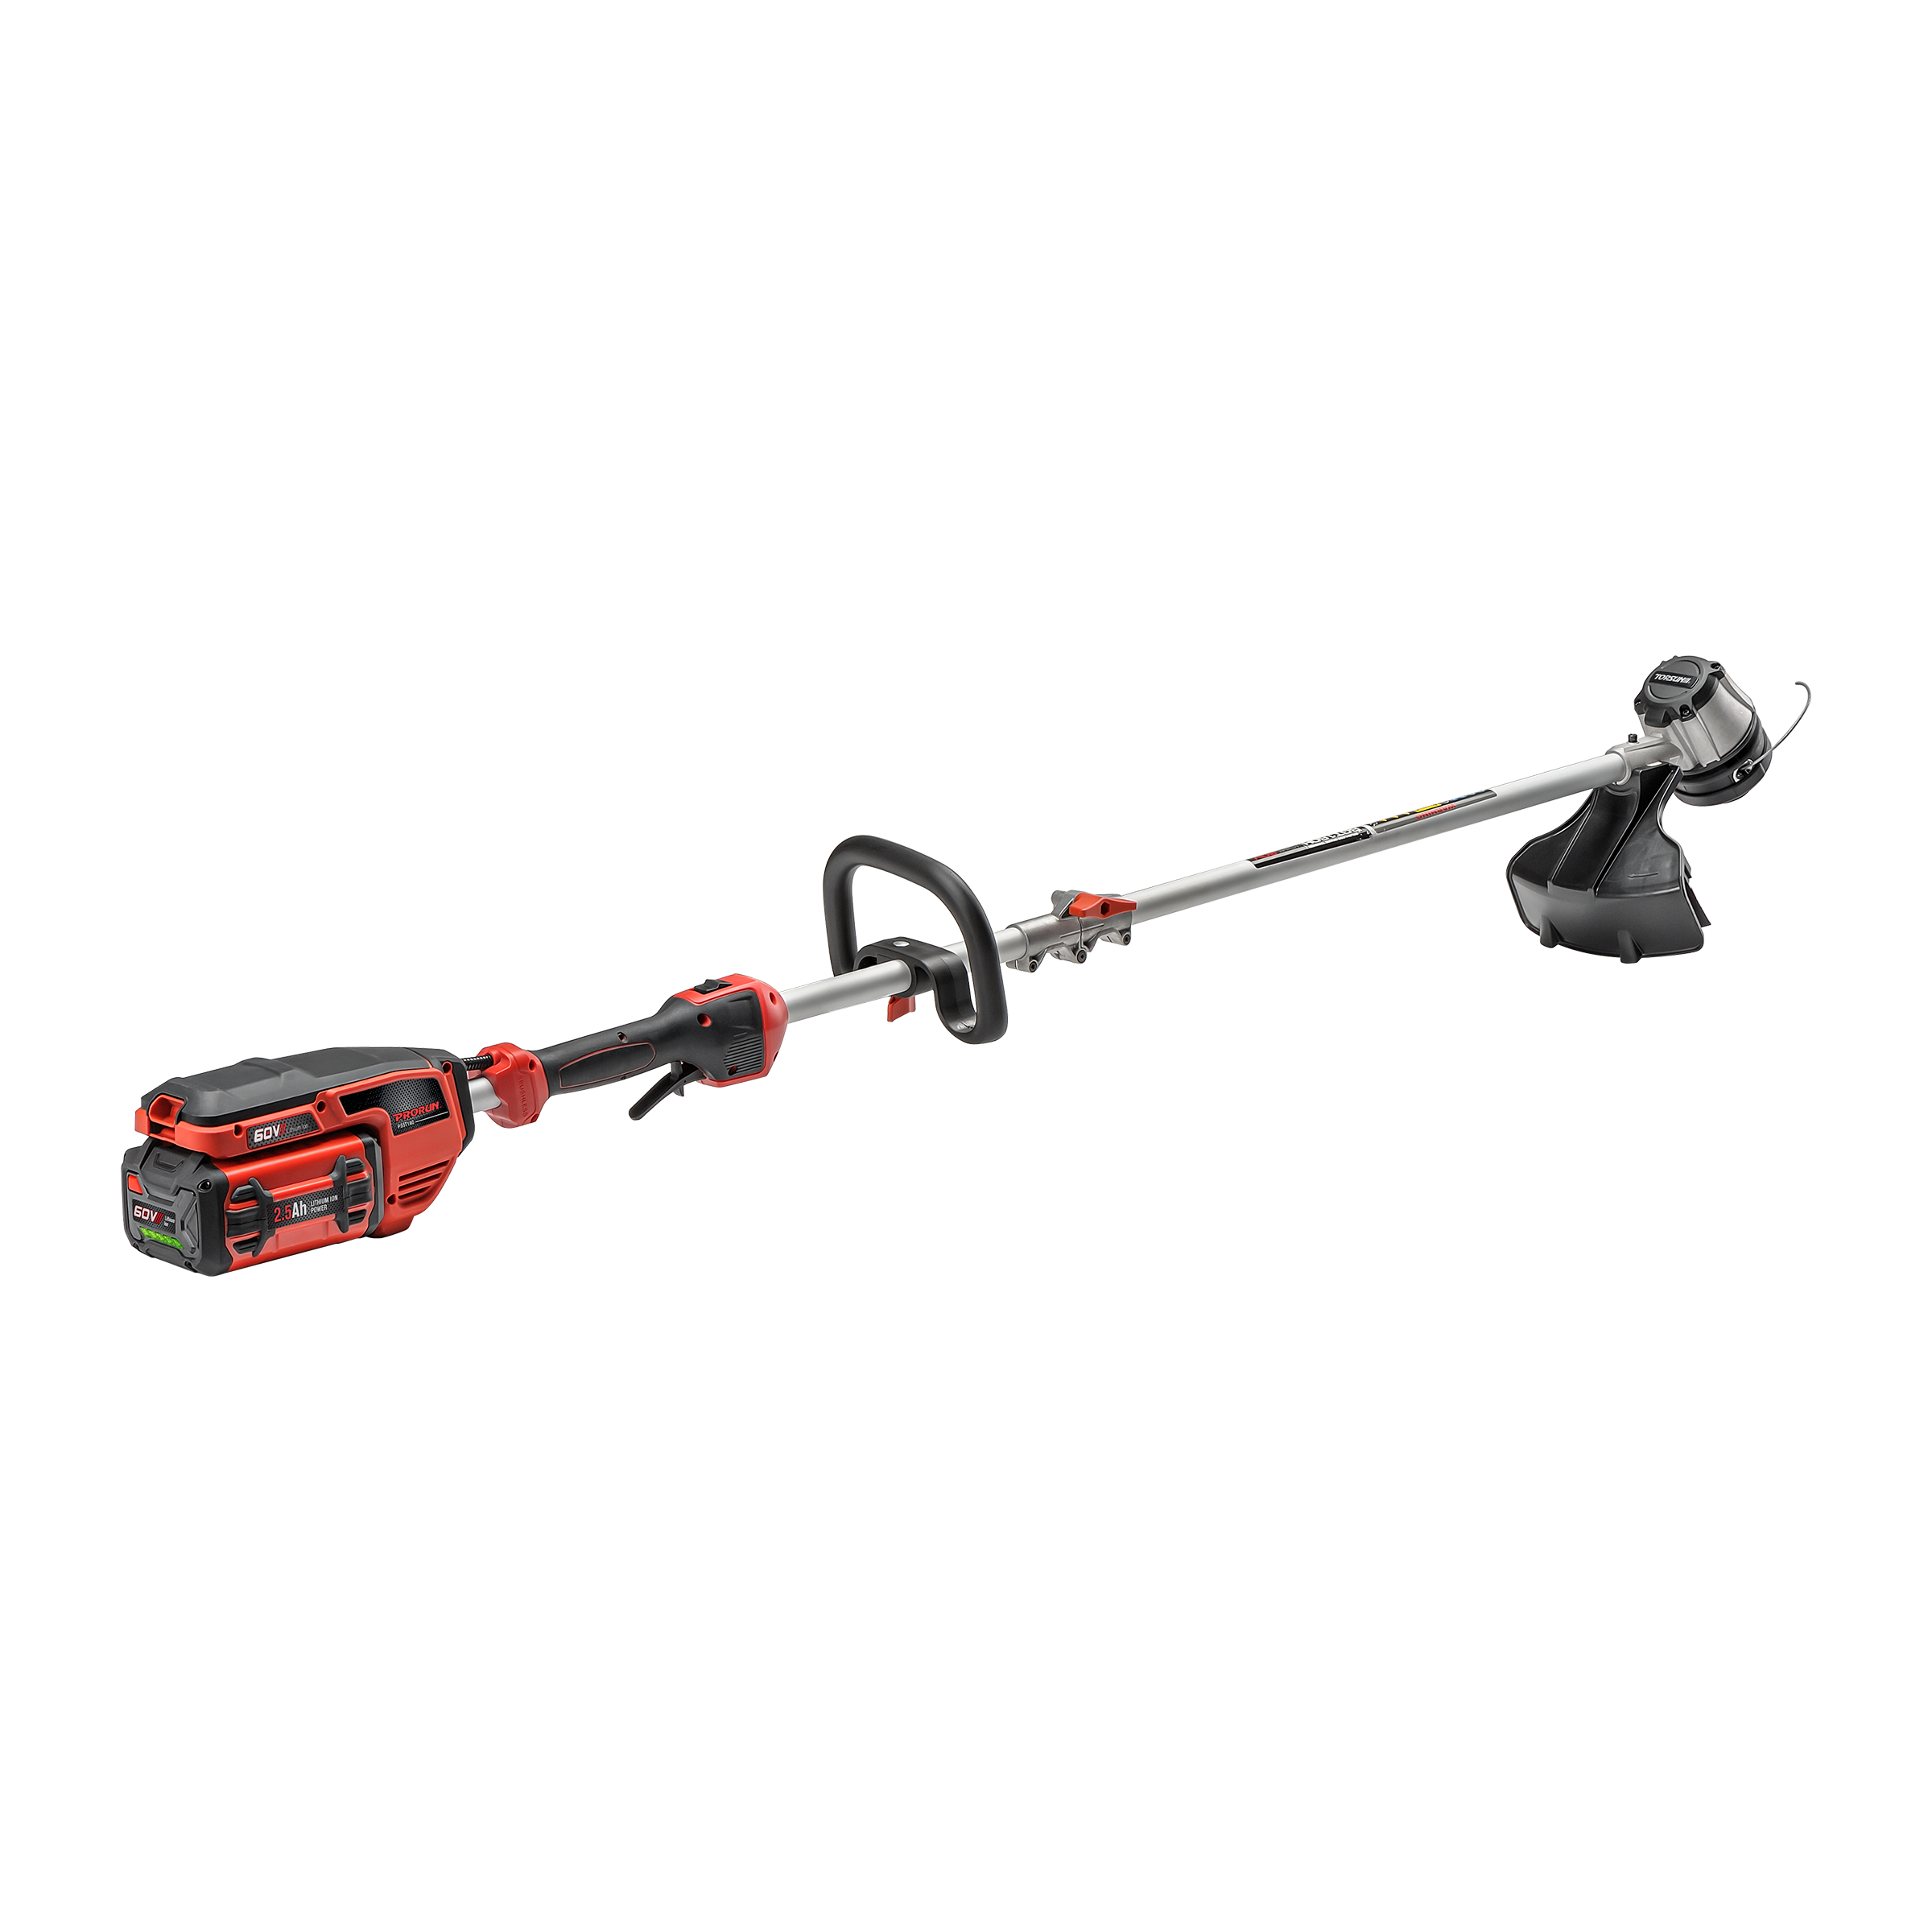 60V MAX 14 / 16 Brushless String Trimmer with 2.5Ah Battery